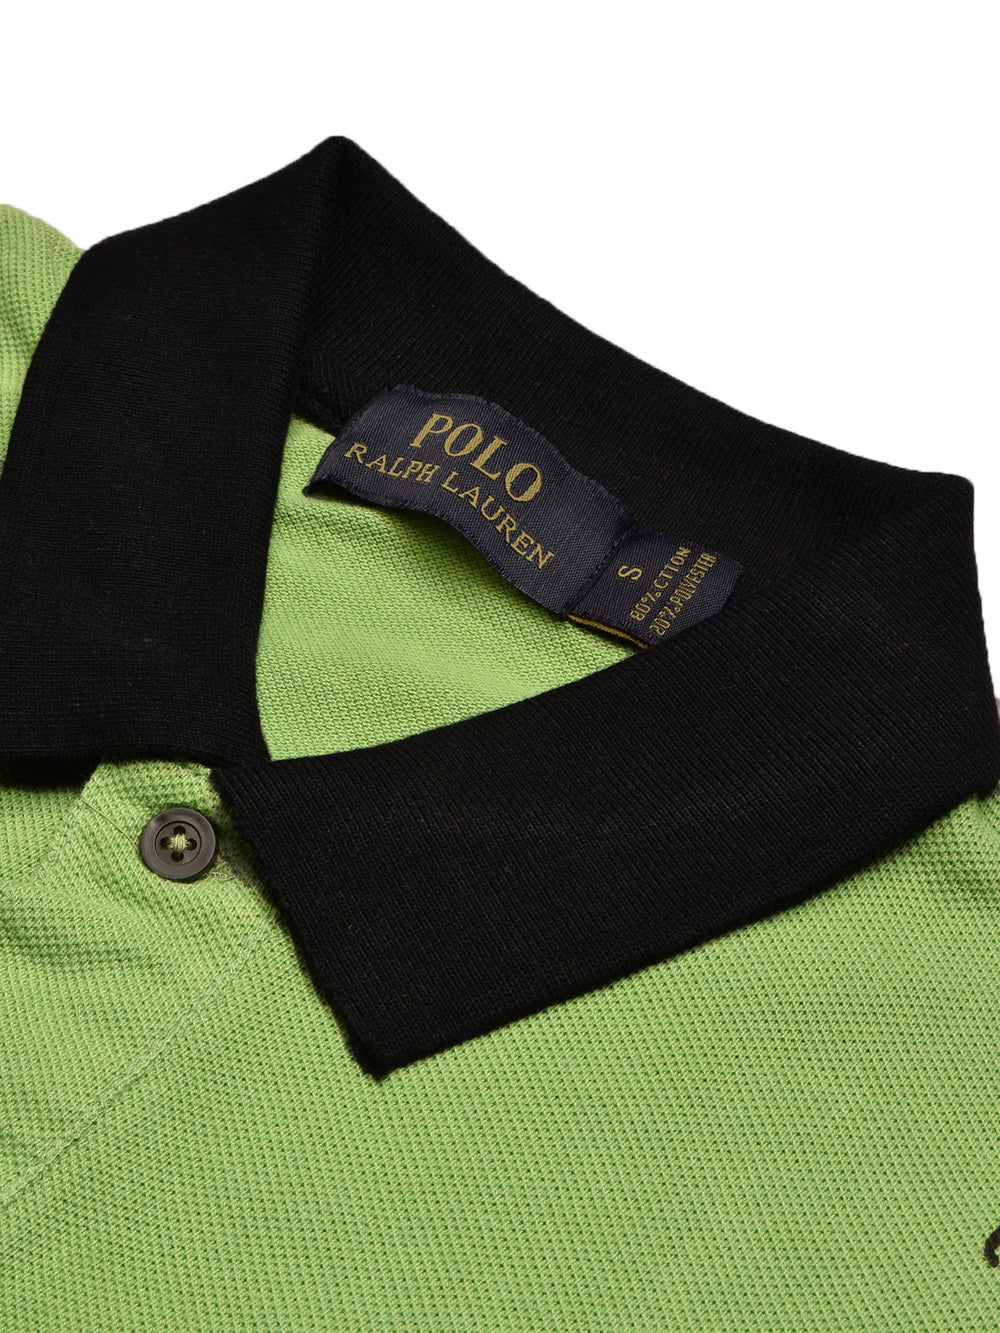 PRL Summer Polo Shirt For Men-Green with Allover Print-BE748